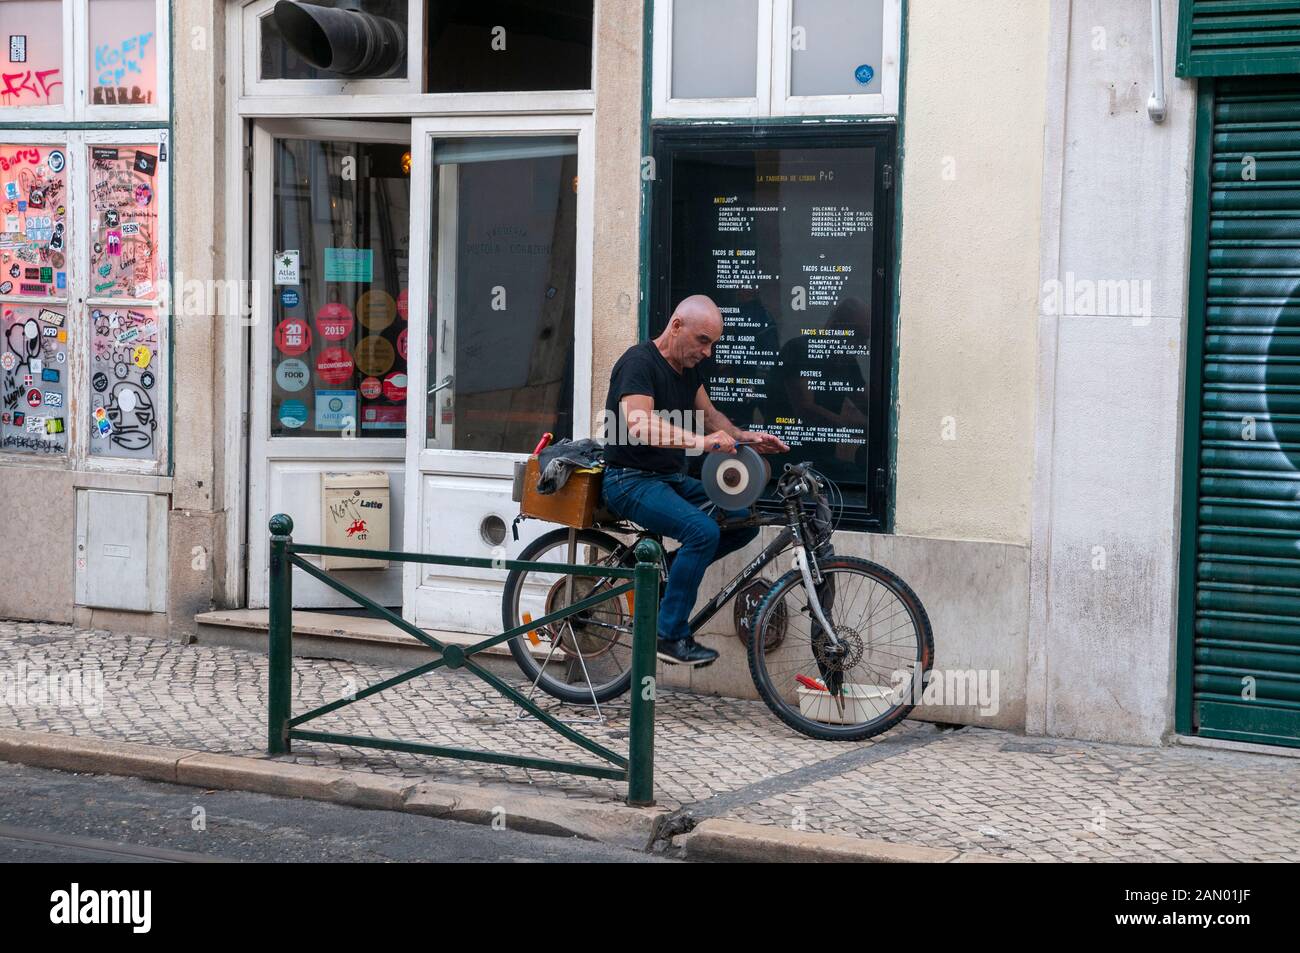 A man sharpens knives with the aid of a bicycle wheel. Photographed in Lisbon, Portugal Stock Photo